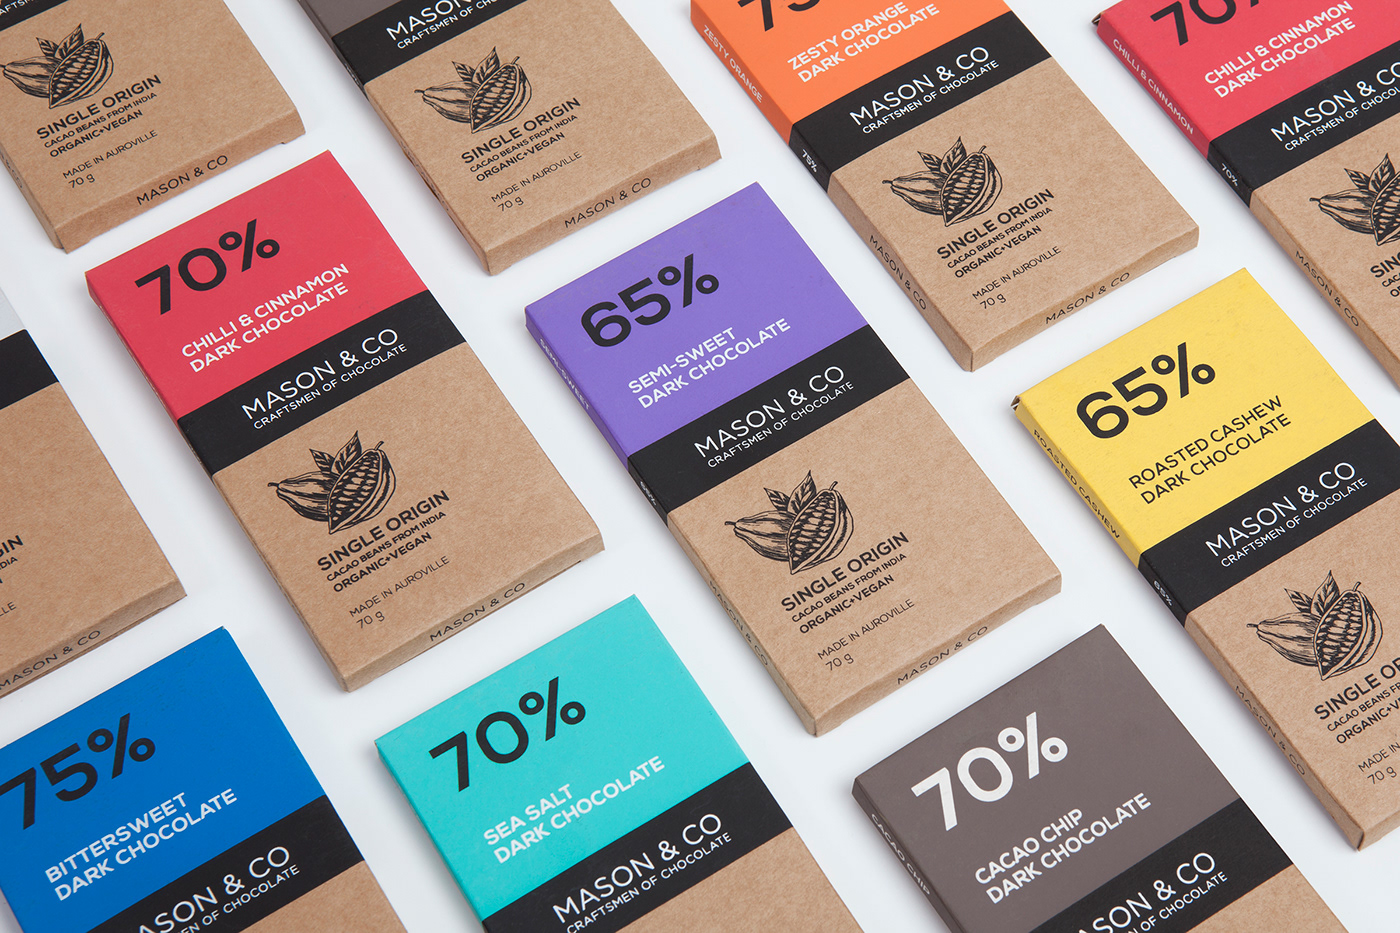 packaging design system for the range of  artisanal chocolate bars by mason&co